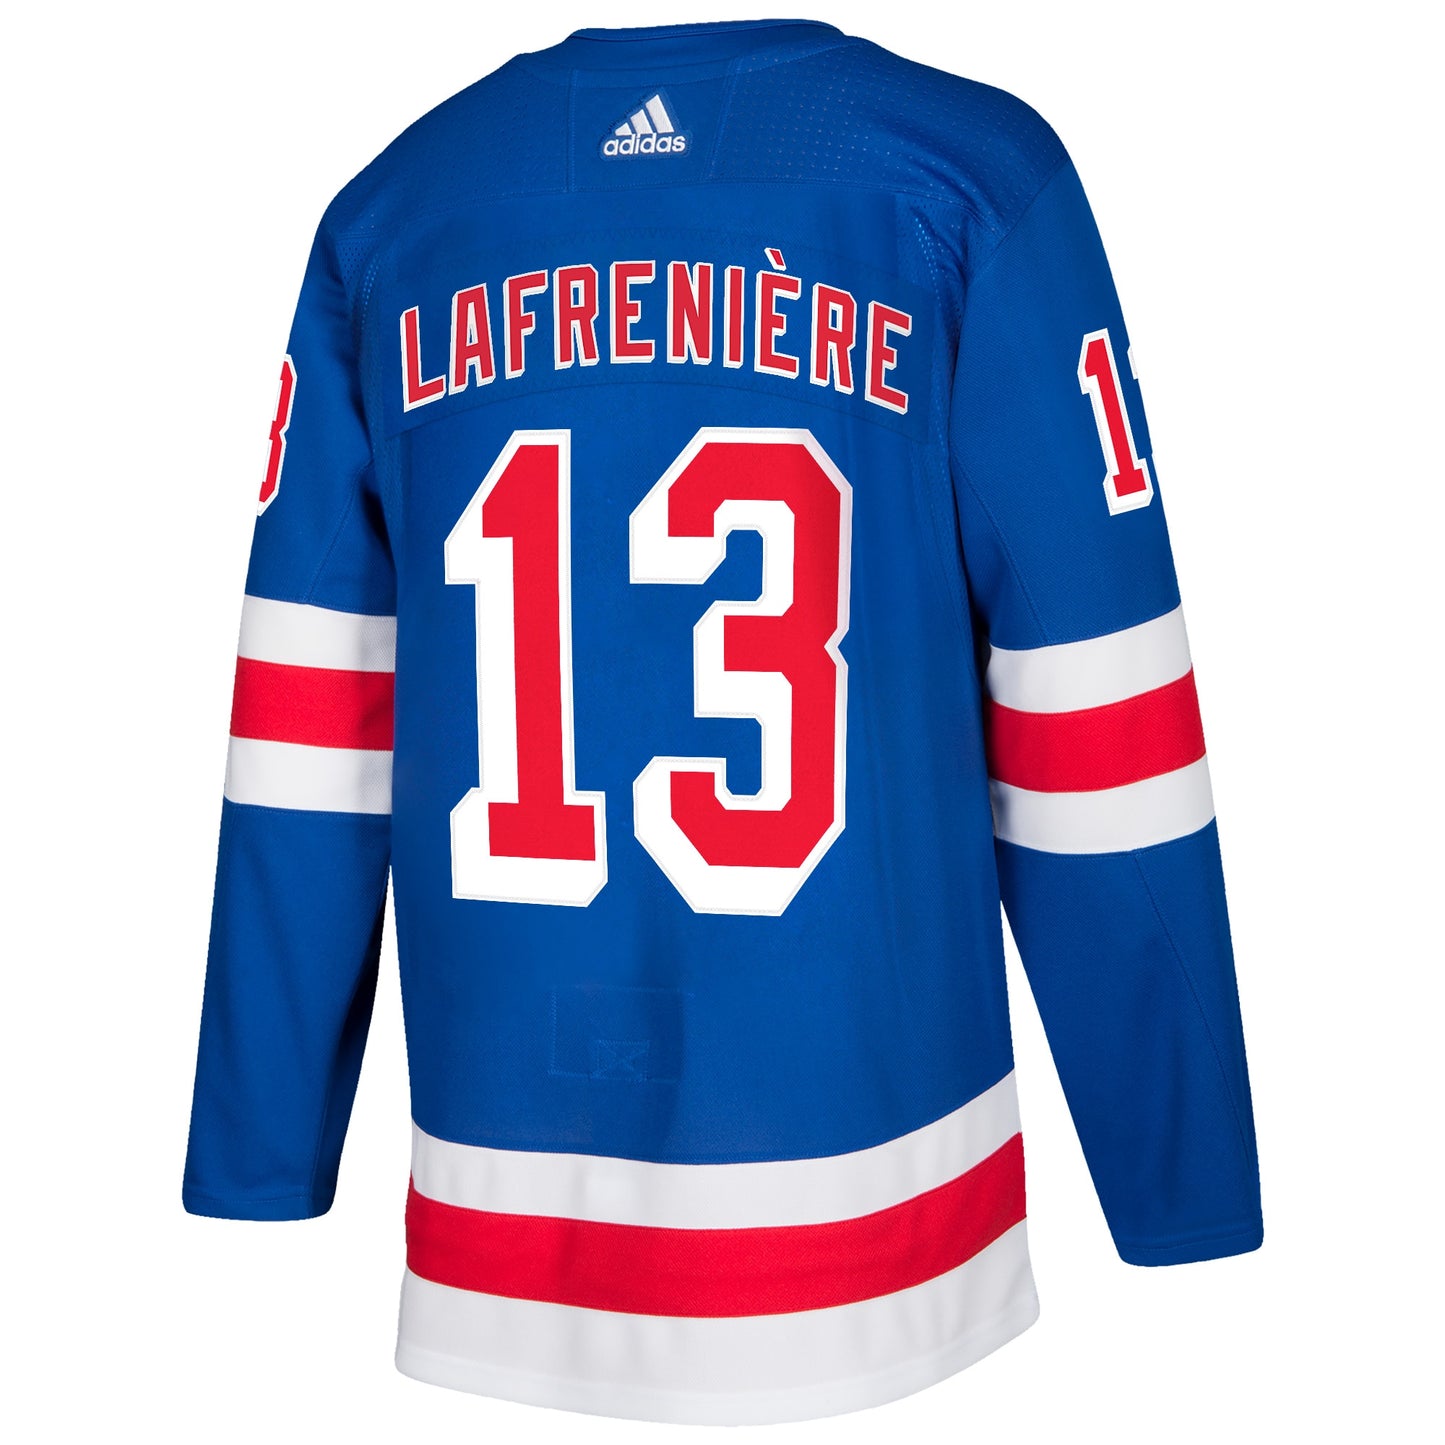 Alexis Lafreniere New York Rangers adidas Home Authentic Player Jersey - Blue